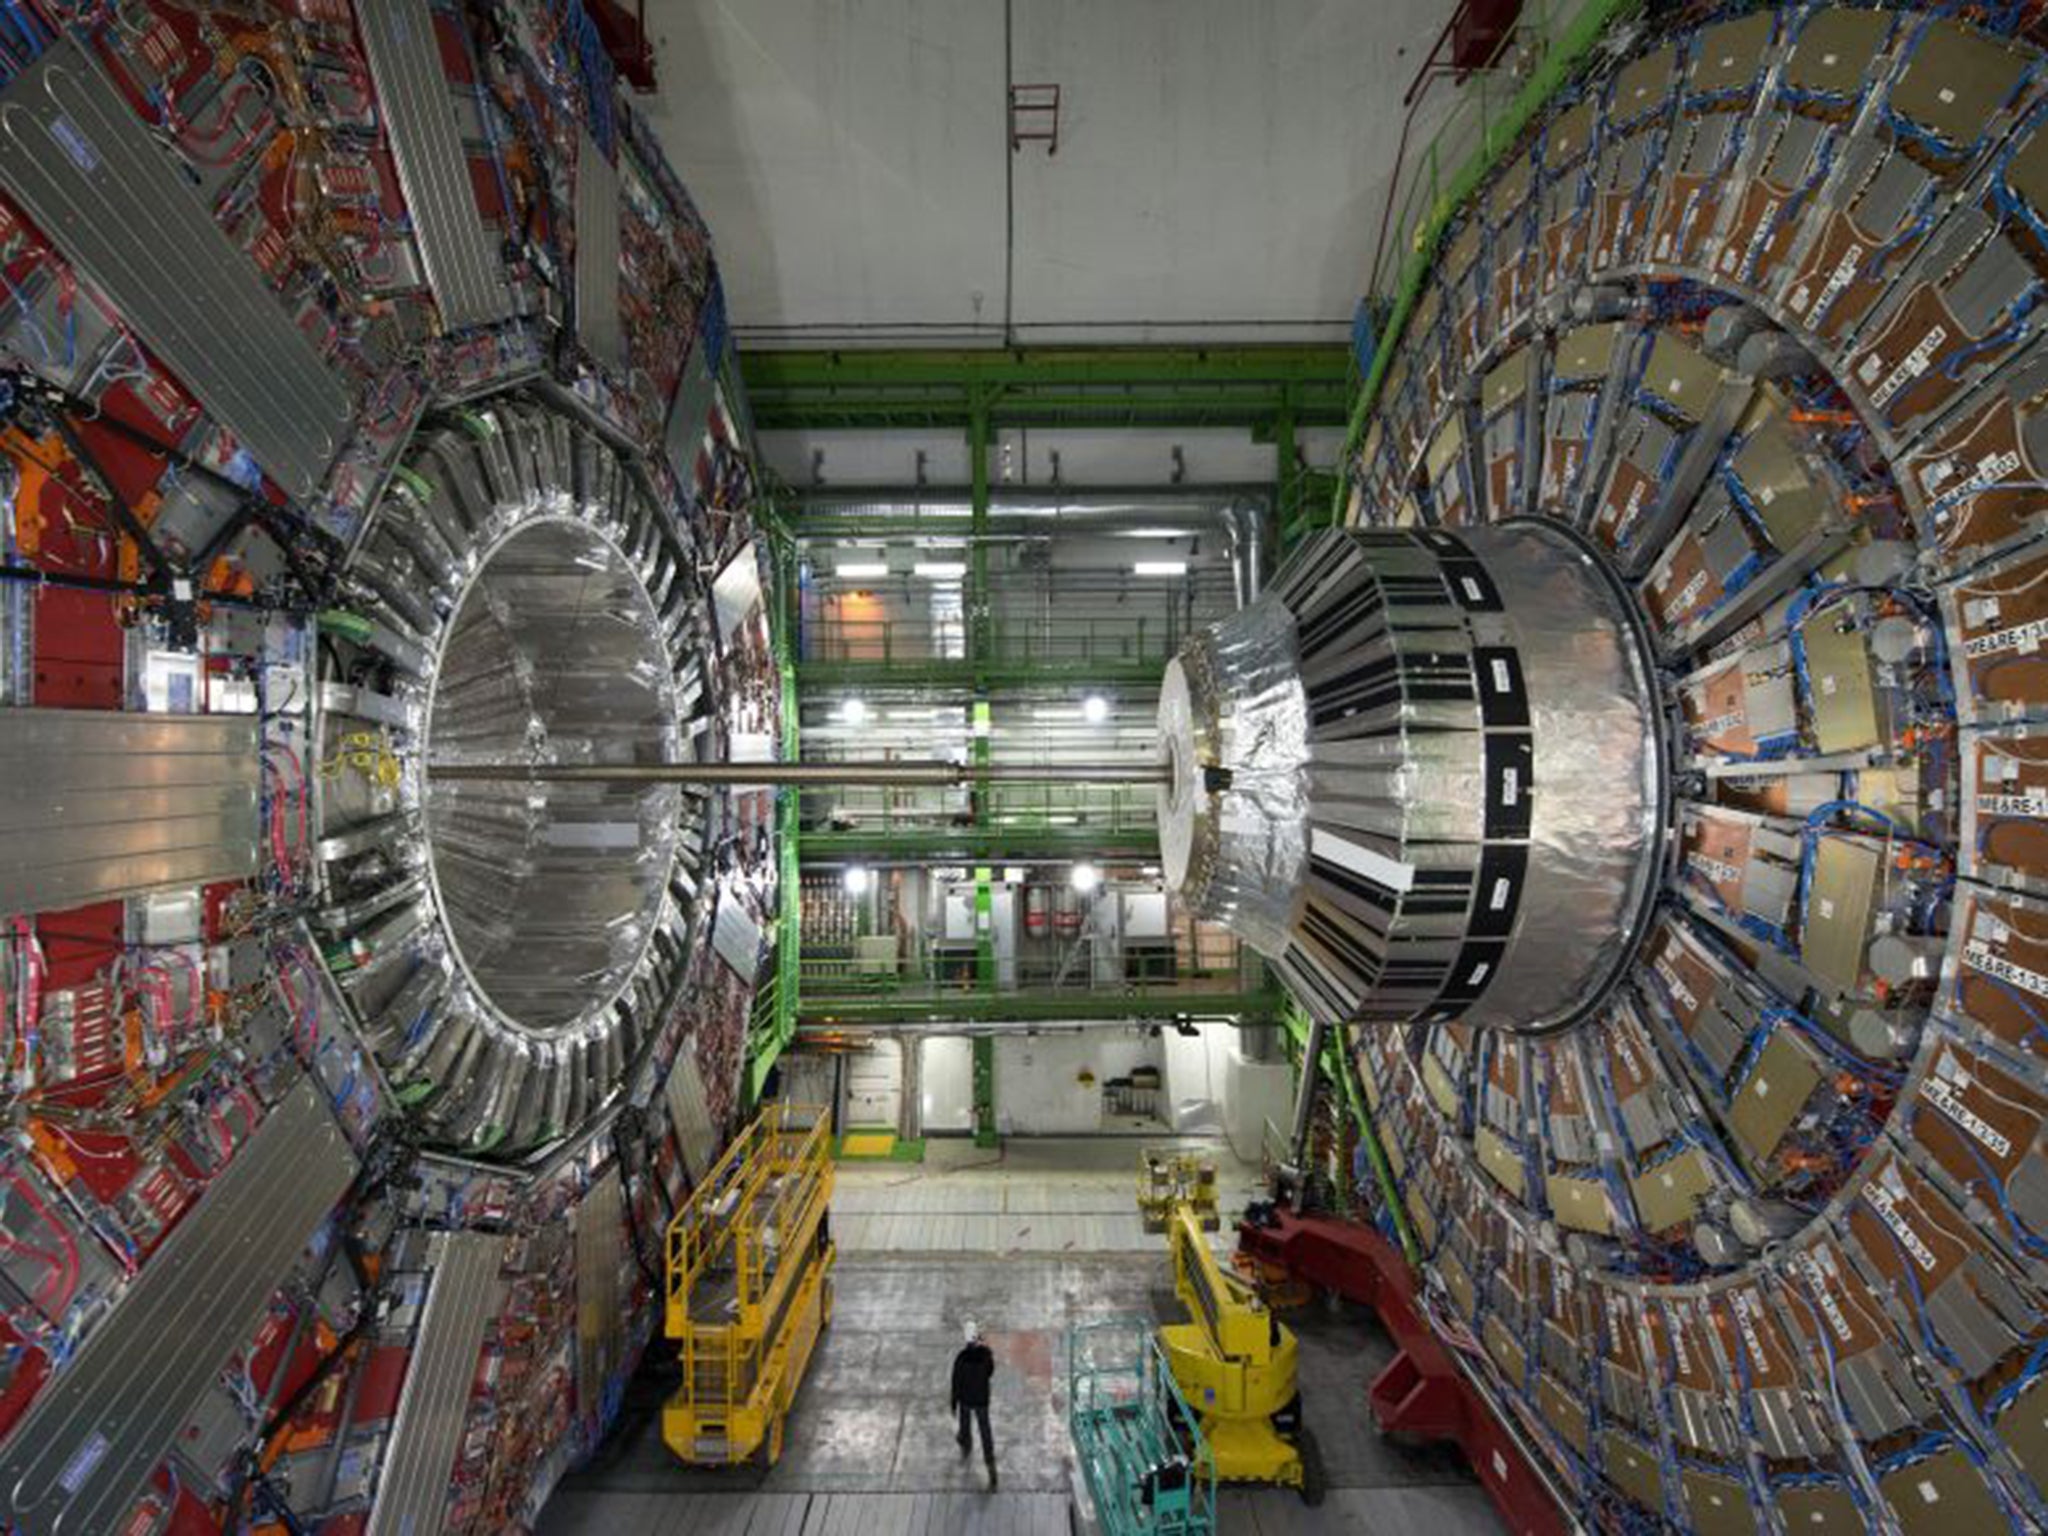 Scientists hope the Large Hadron Collider will provide dark matter